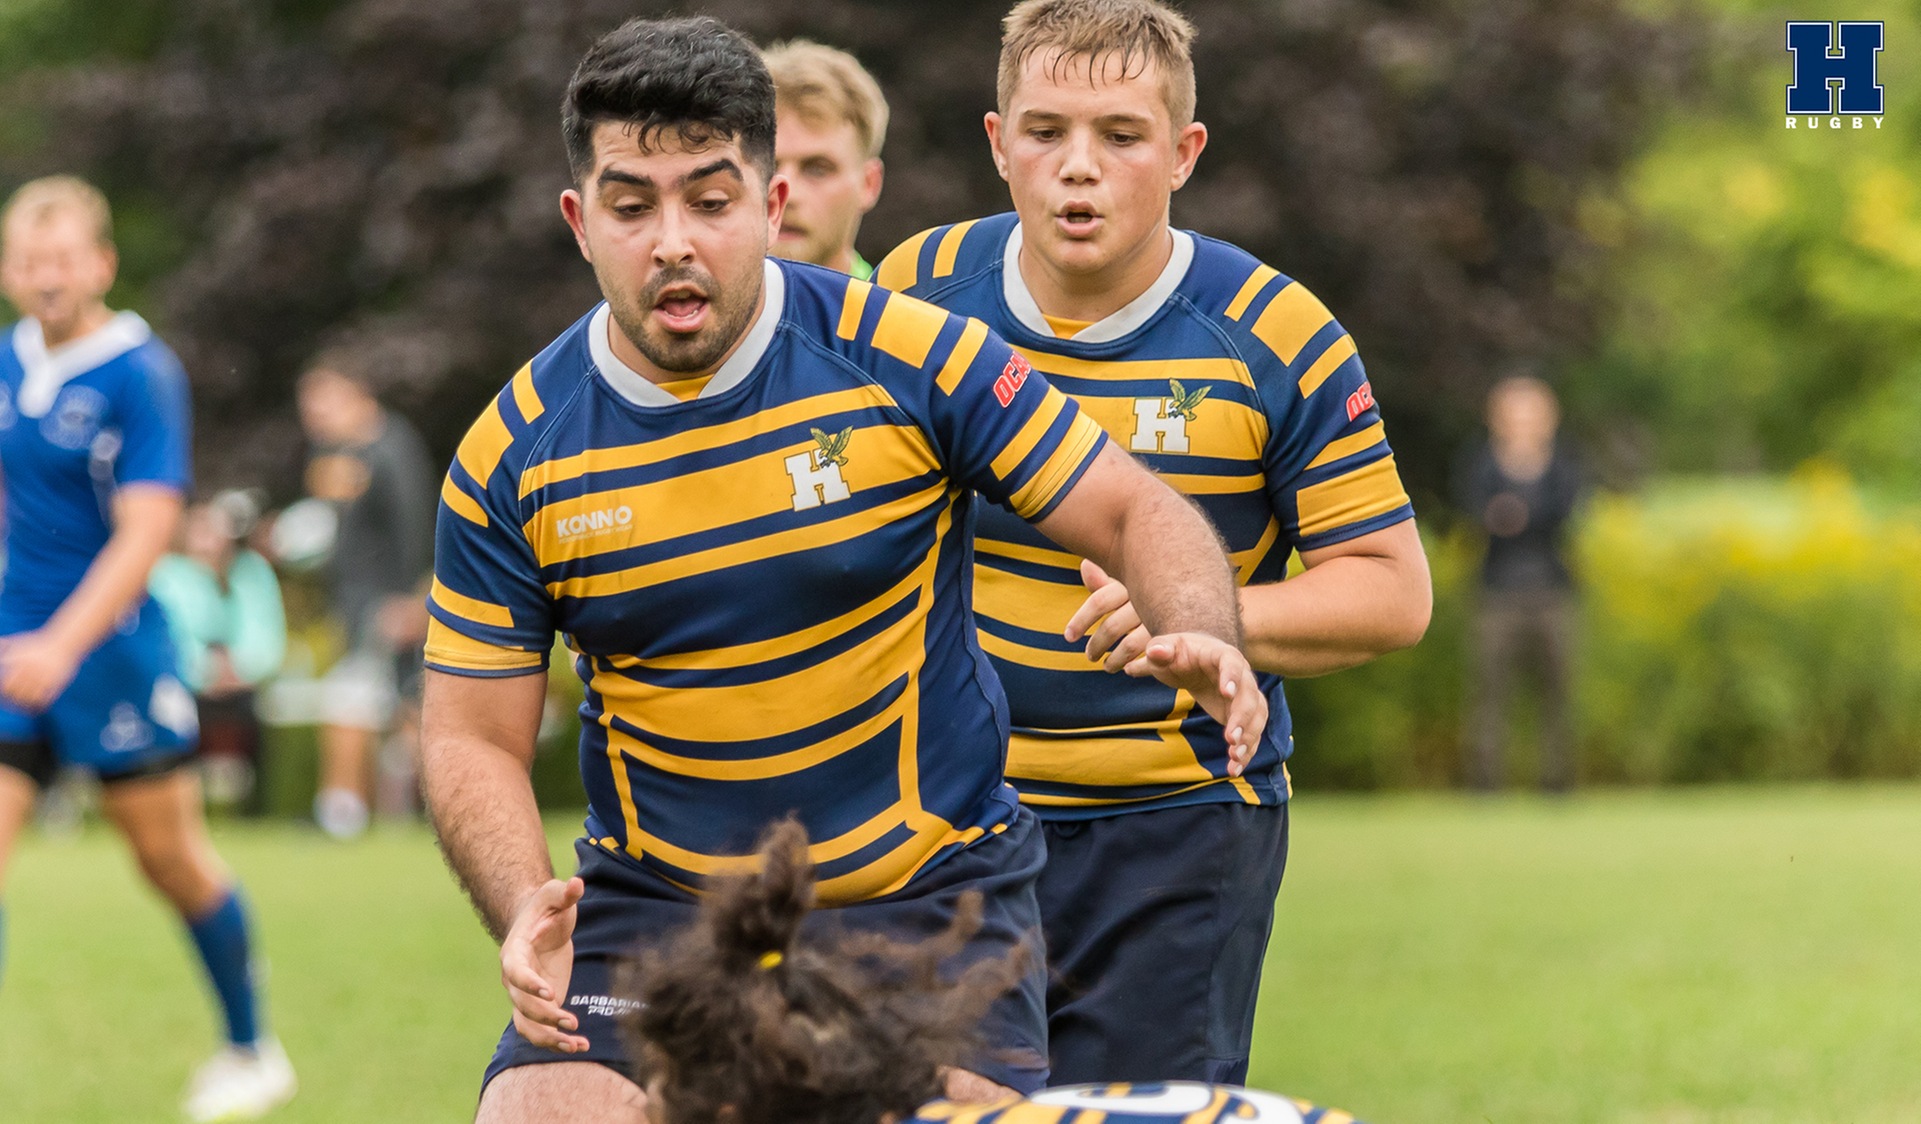 Men's Rugby Set to Take on Algonquin in OCAA Quarter-Final